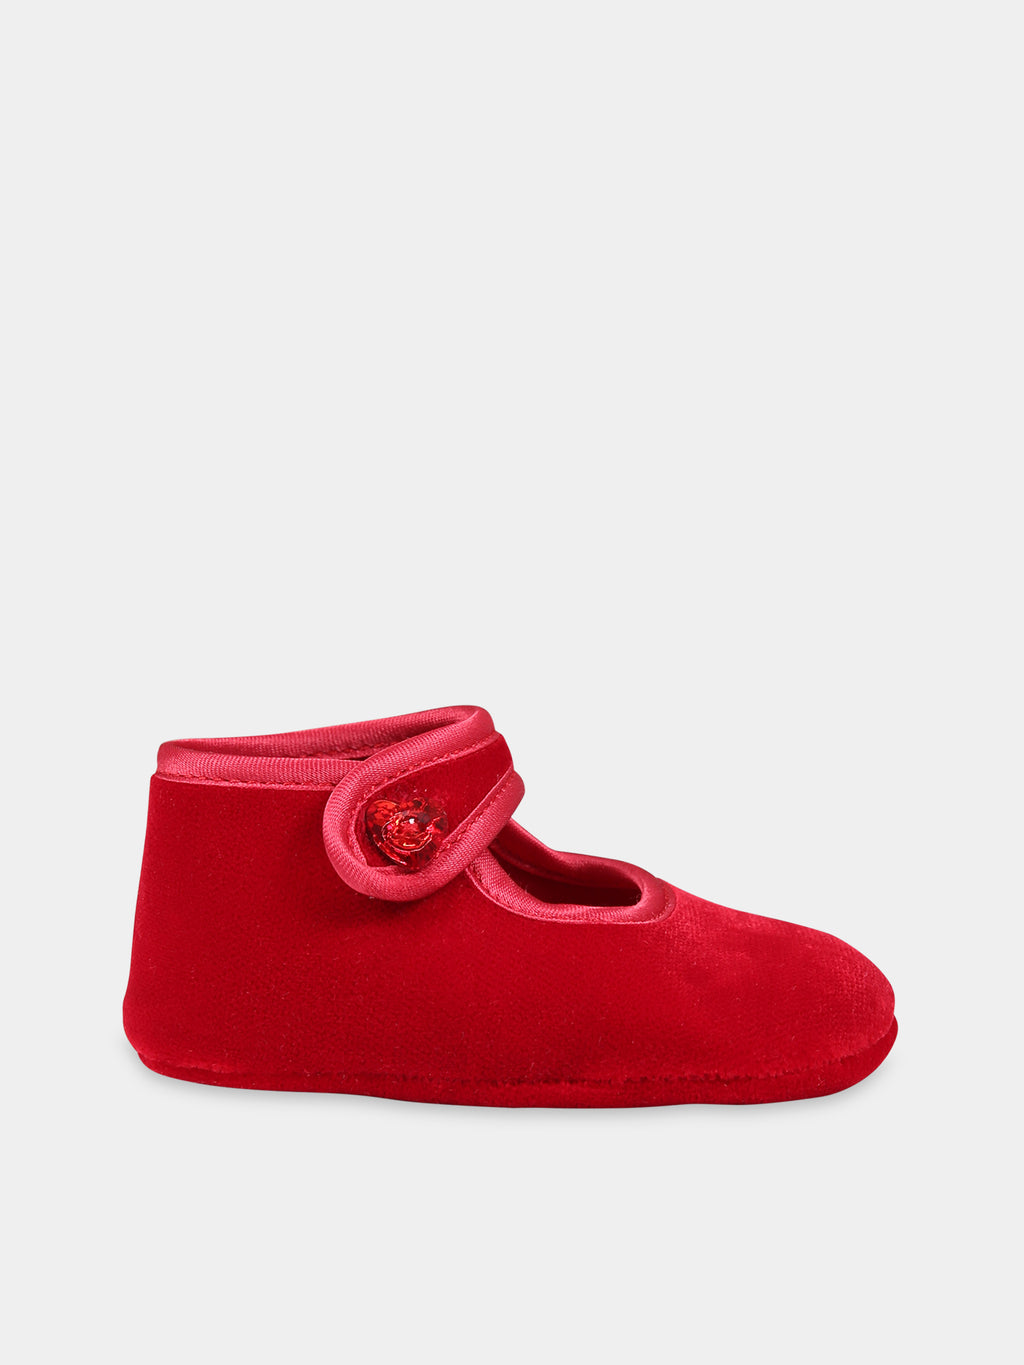 Red flat shoes for baby girl with hearts